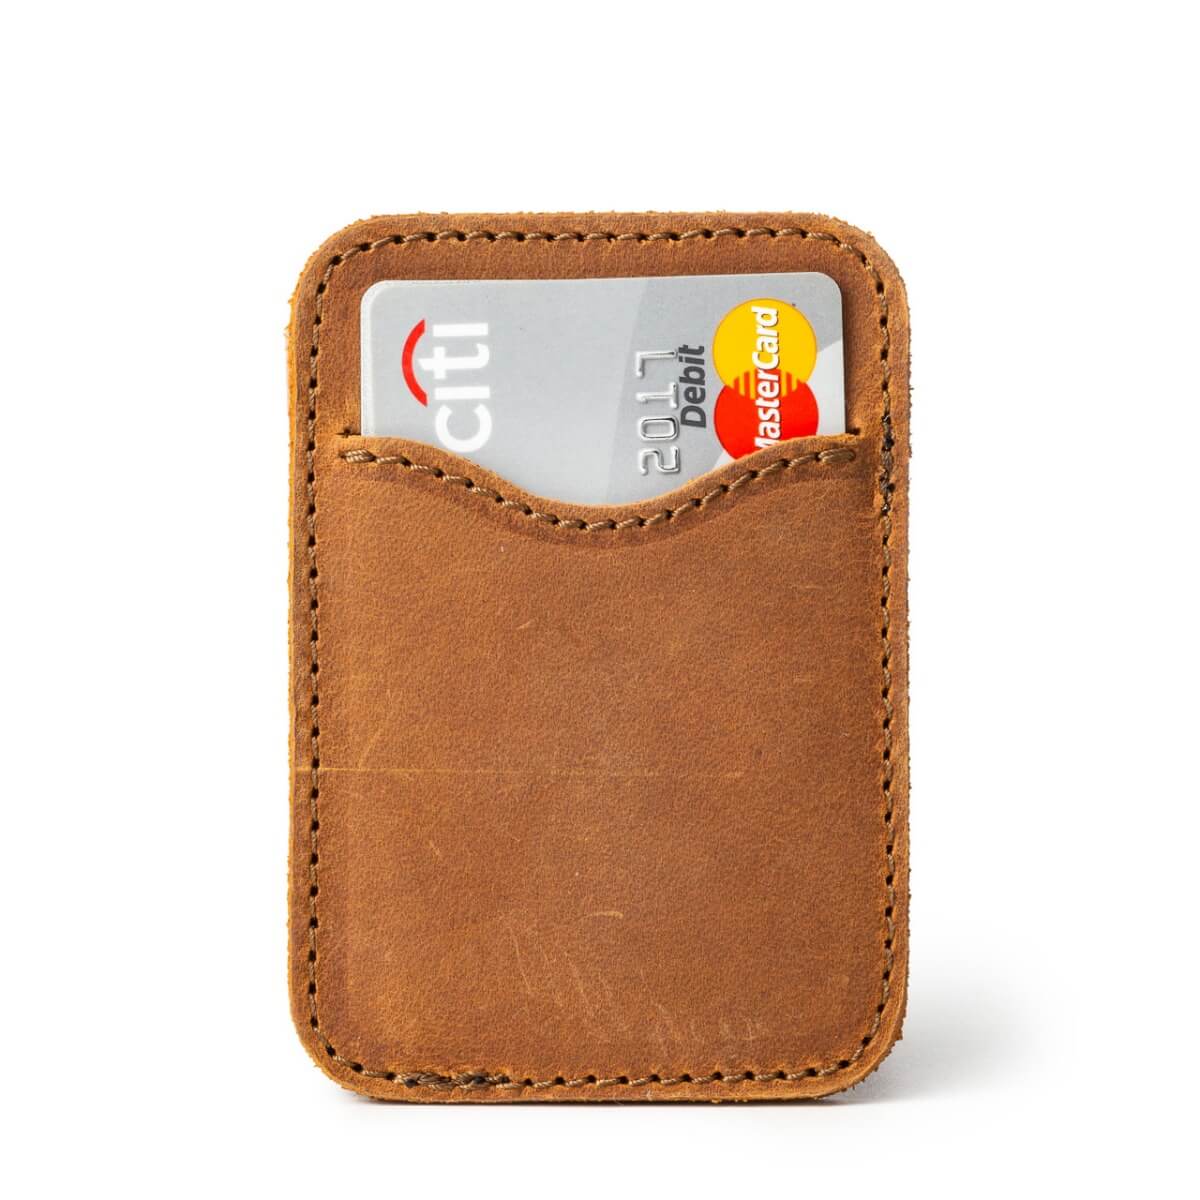 Top 8 Best Slim Wallets for Men (2021 Review) - The Modest Man